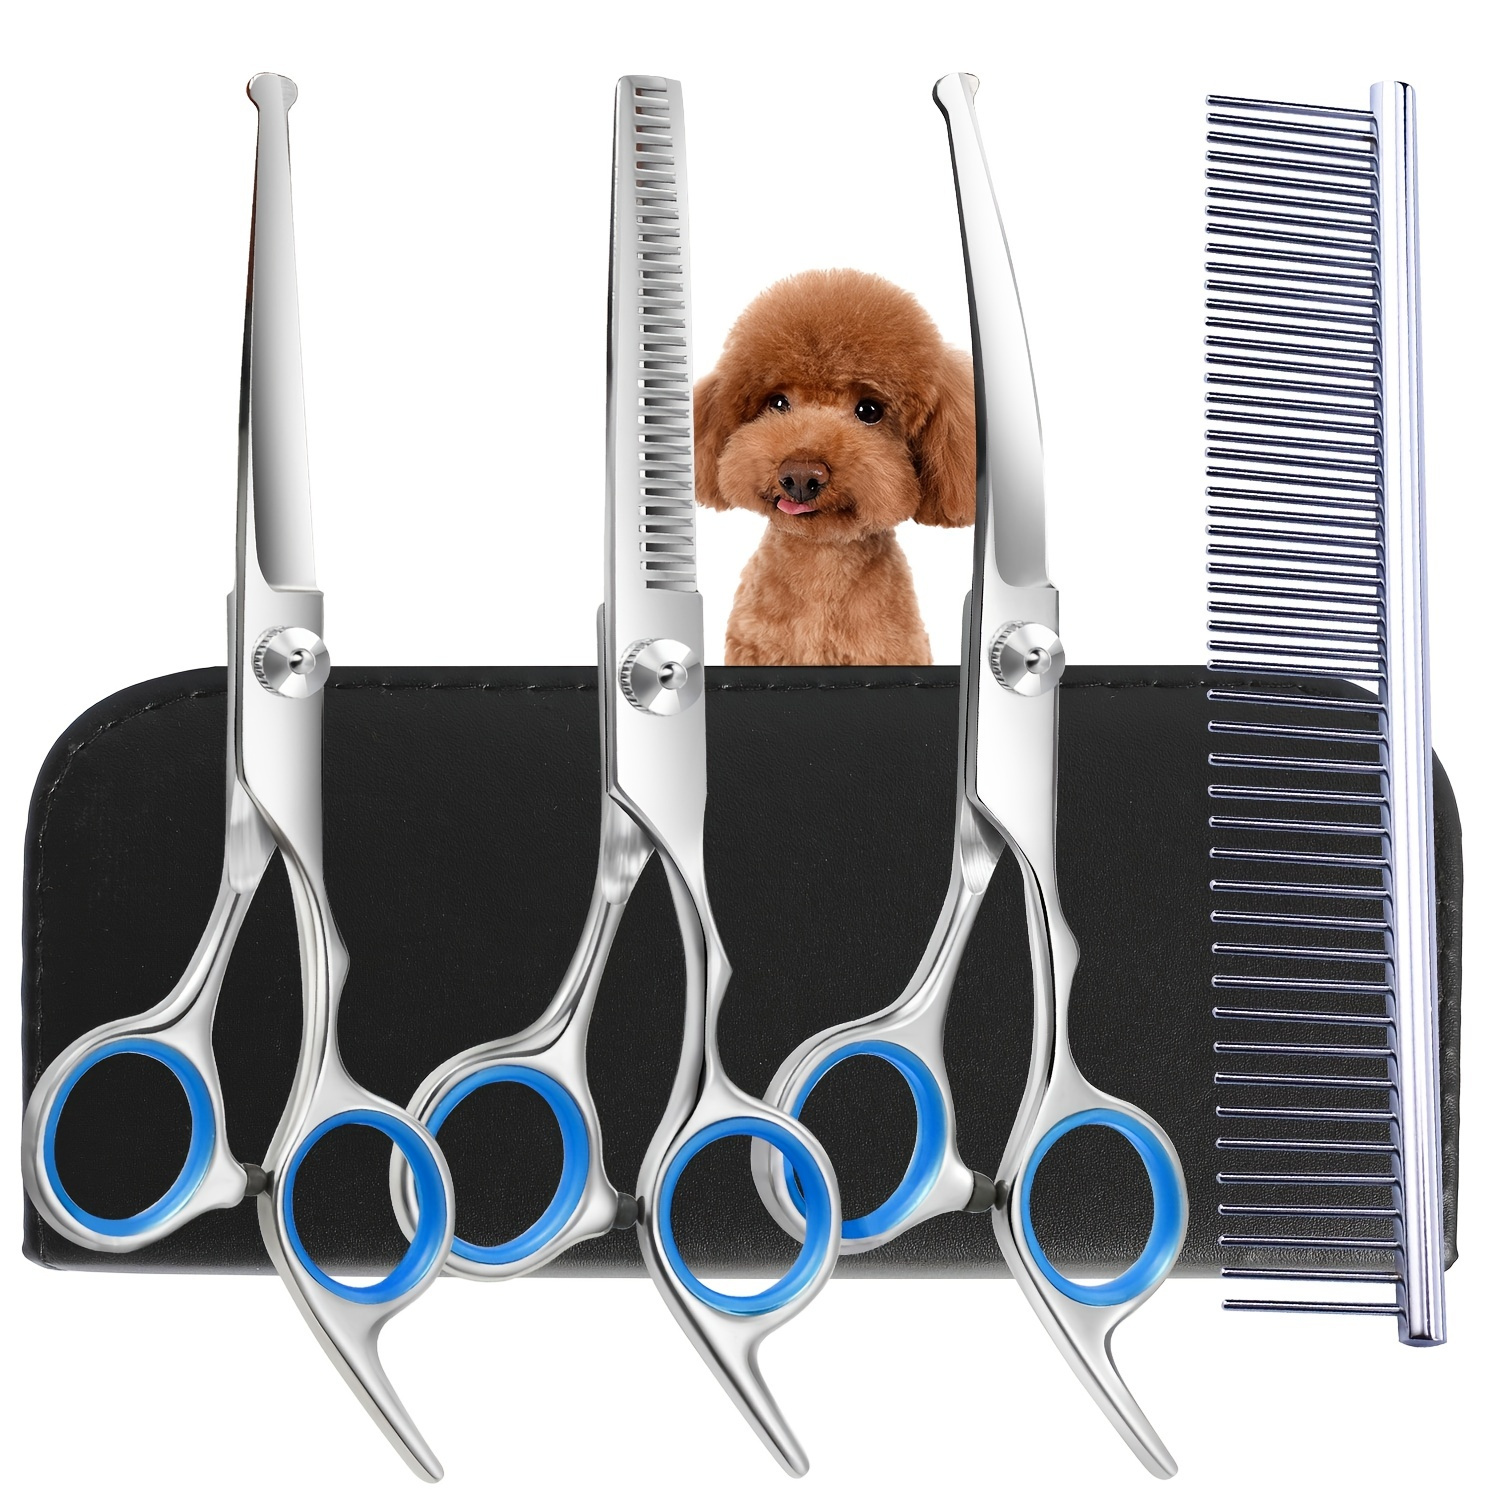 

4pcs Professional Dog Grooming Scissors - Stainless Steel Round Tip Down-curved Thinning And Cutting Shears For Precise Trimming And Shaping